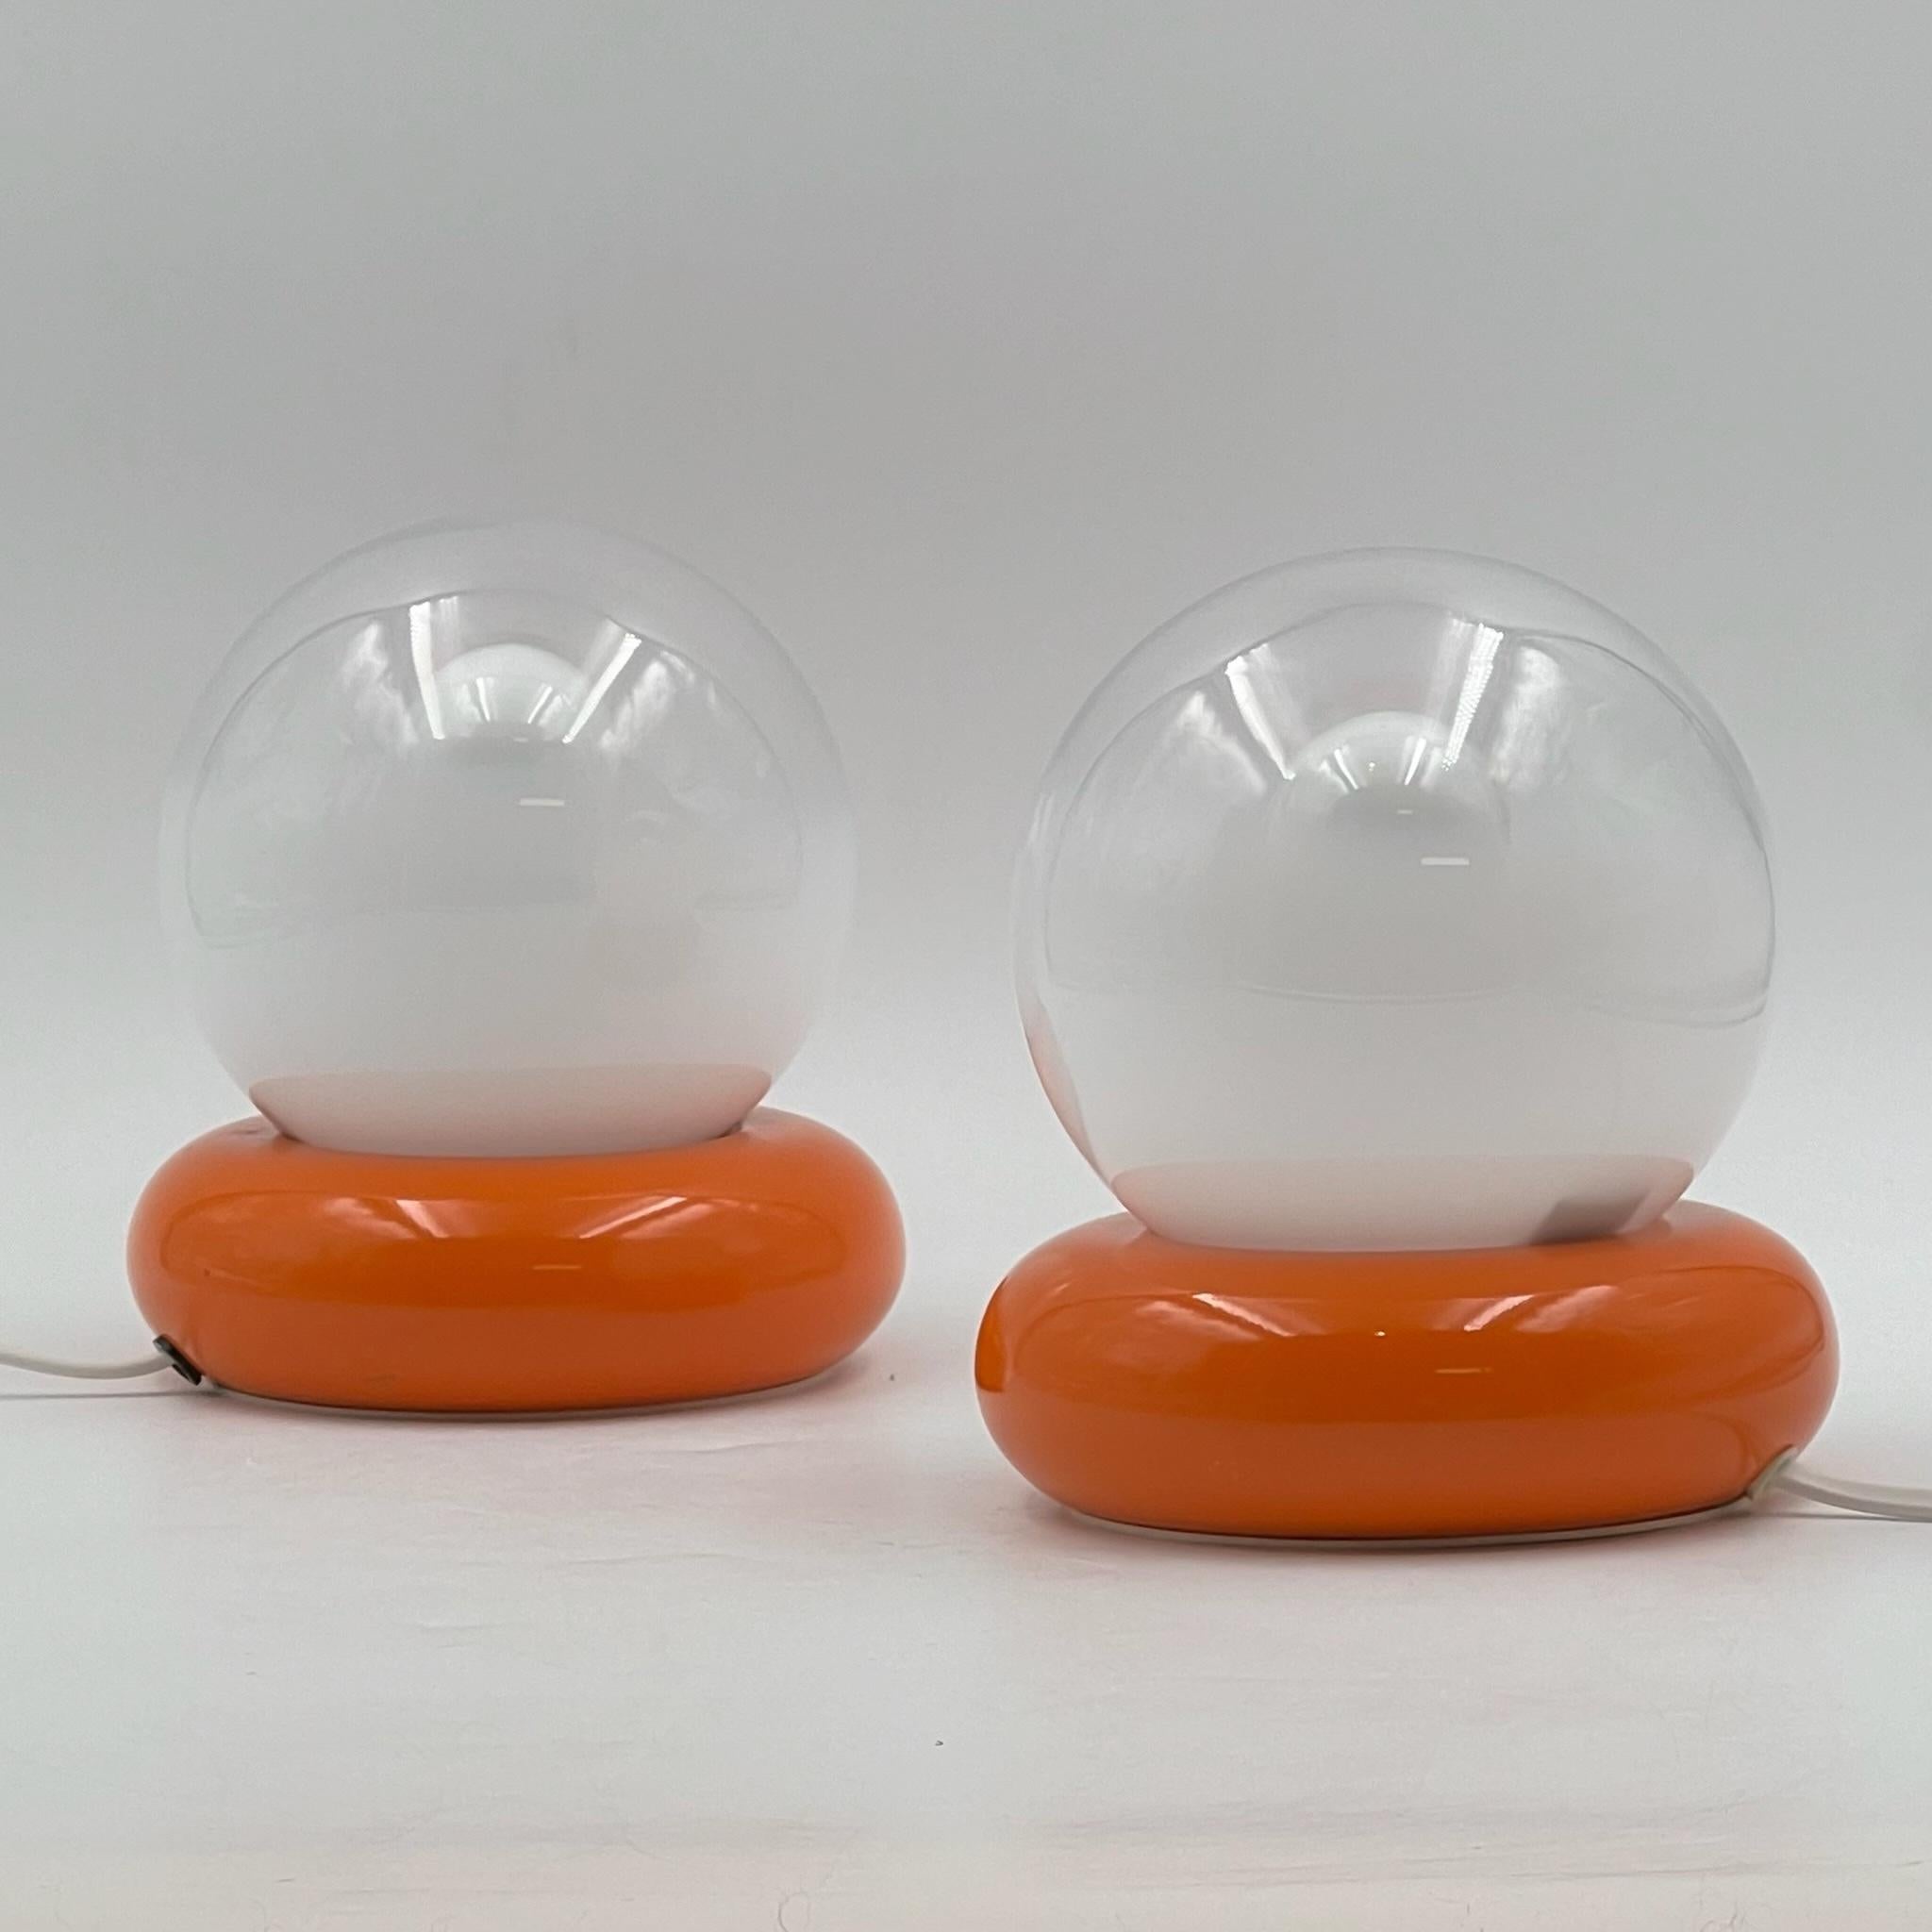 Mid-Century Modern Targetti Sankey Vintage Pair of Table Lamps - Orange and Glass Globes 1970s